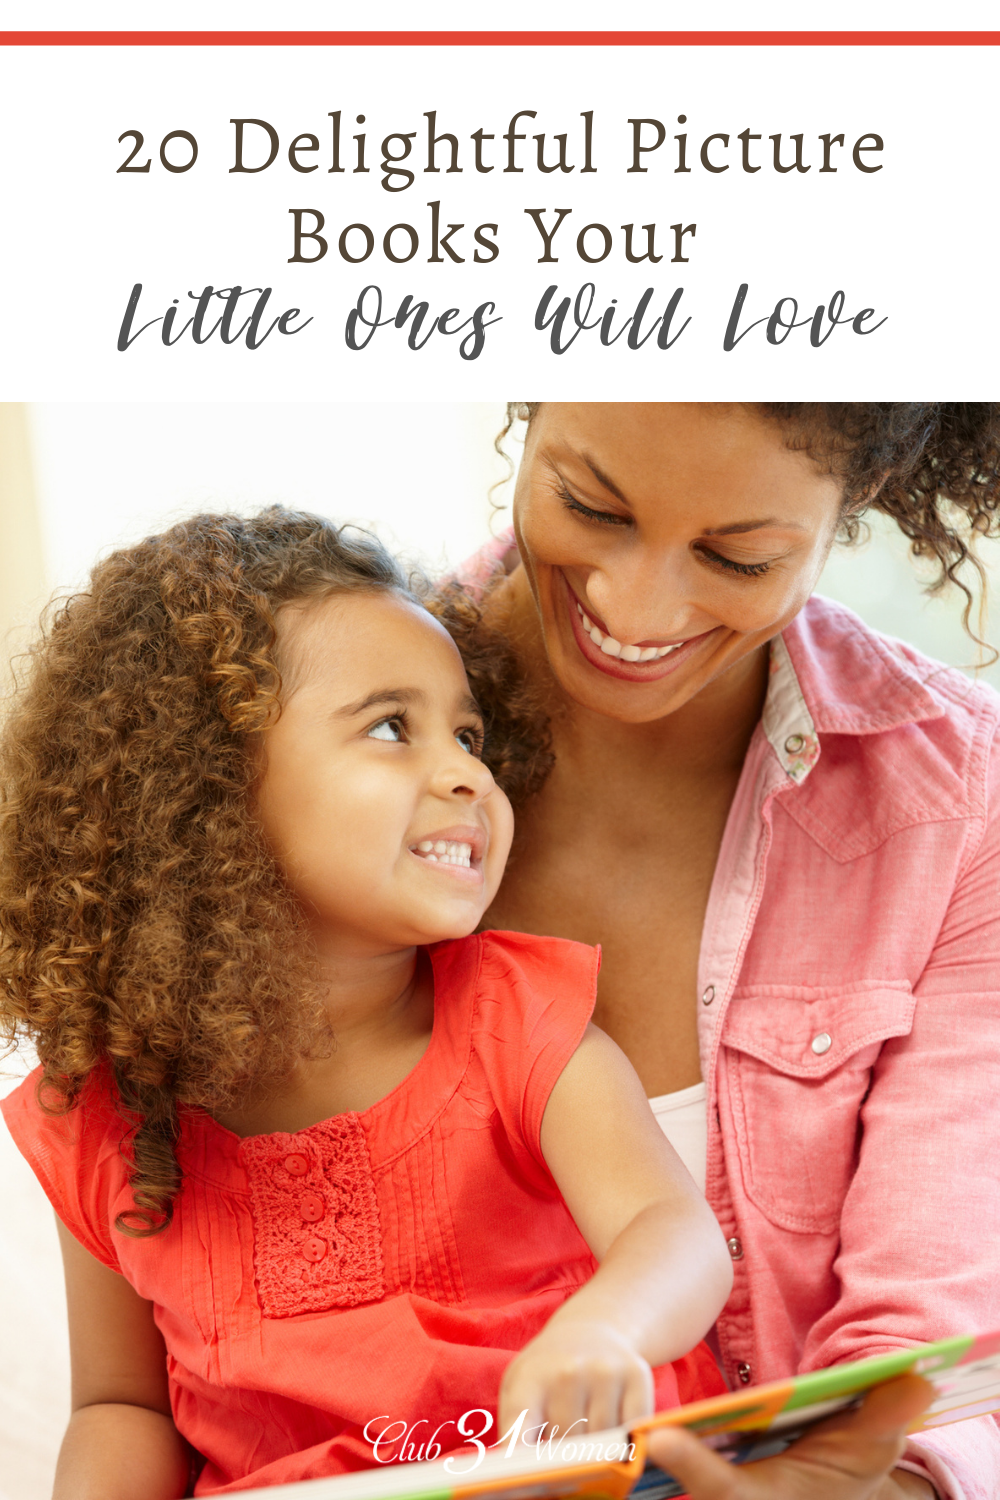 Round up your littles and stack up on these delightful picture books to read together! They are sure to engage your littles! via @Club31Women